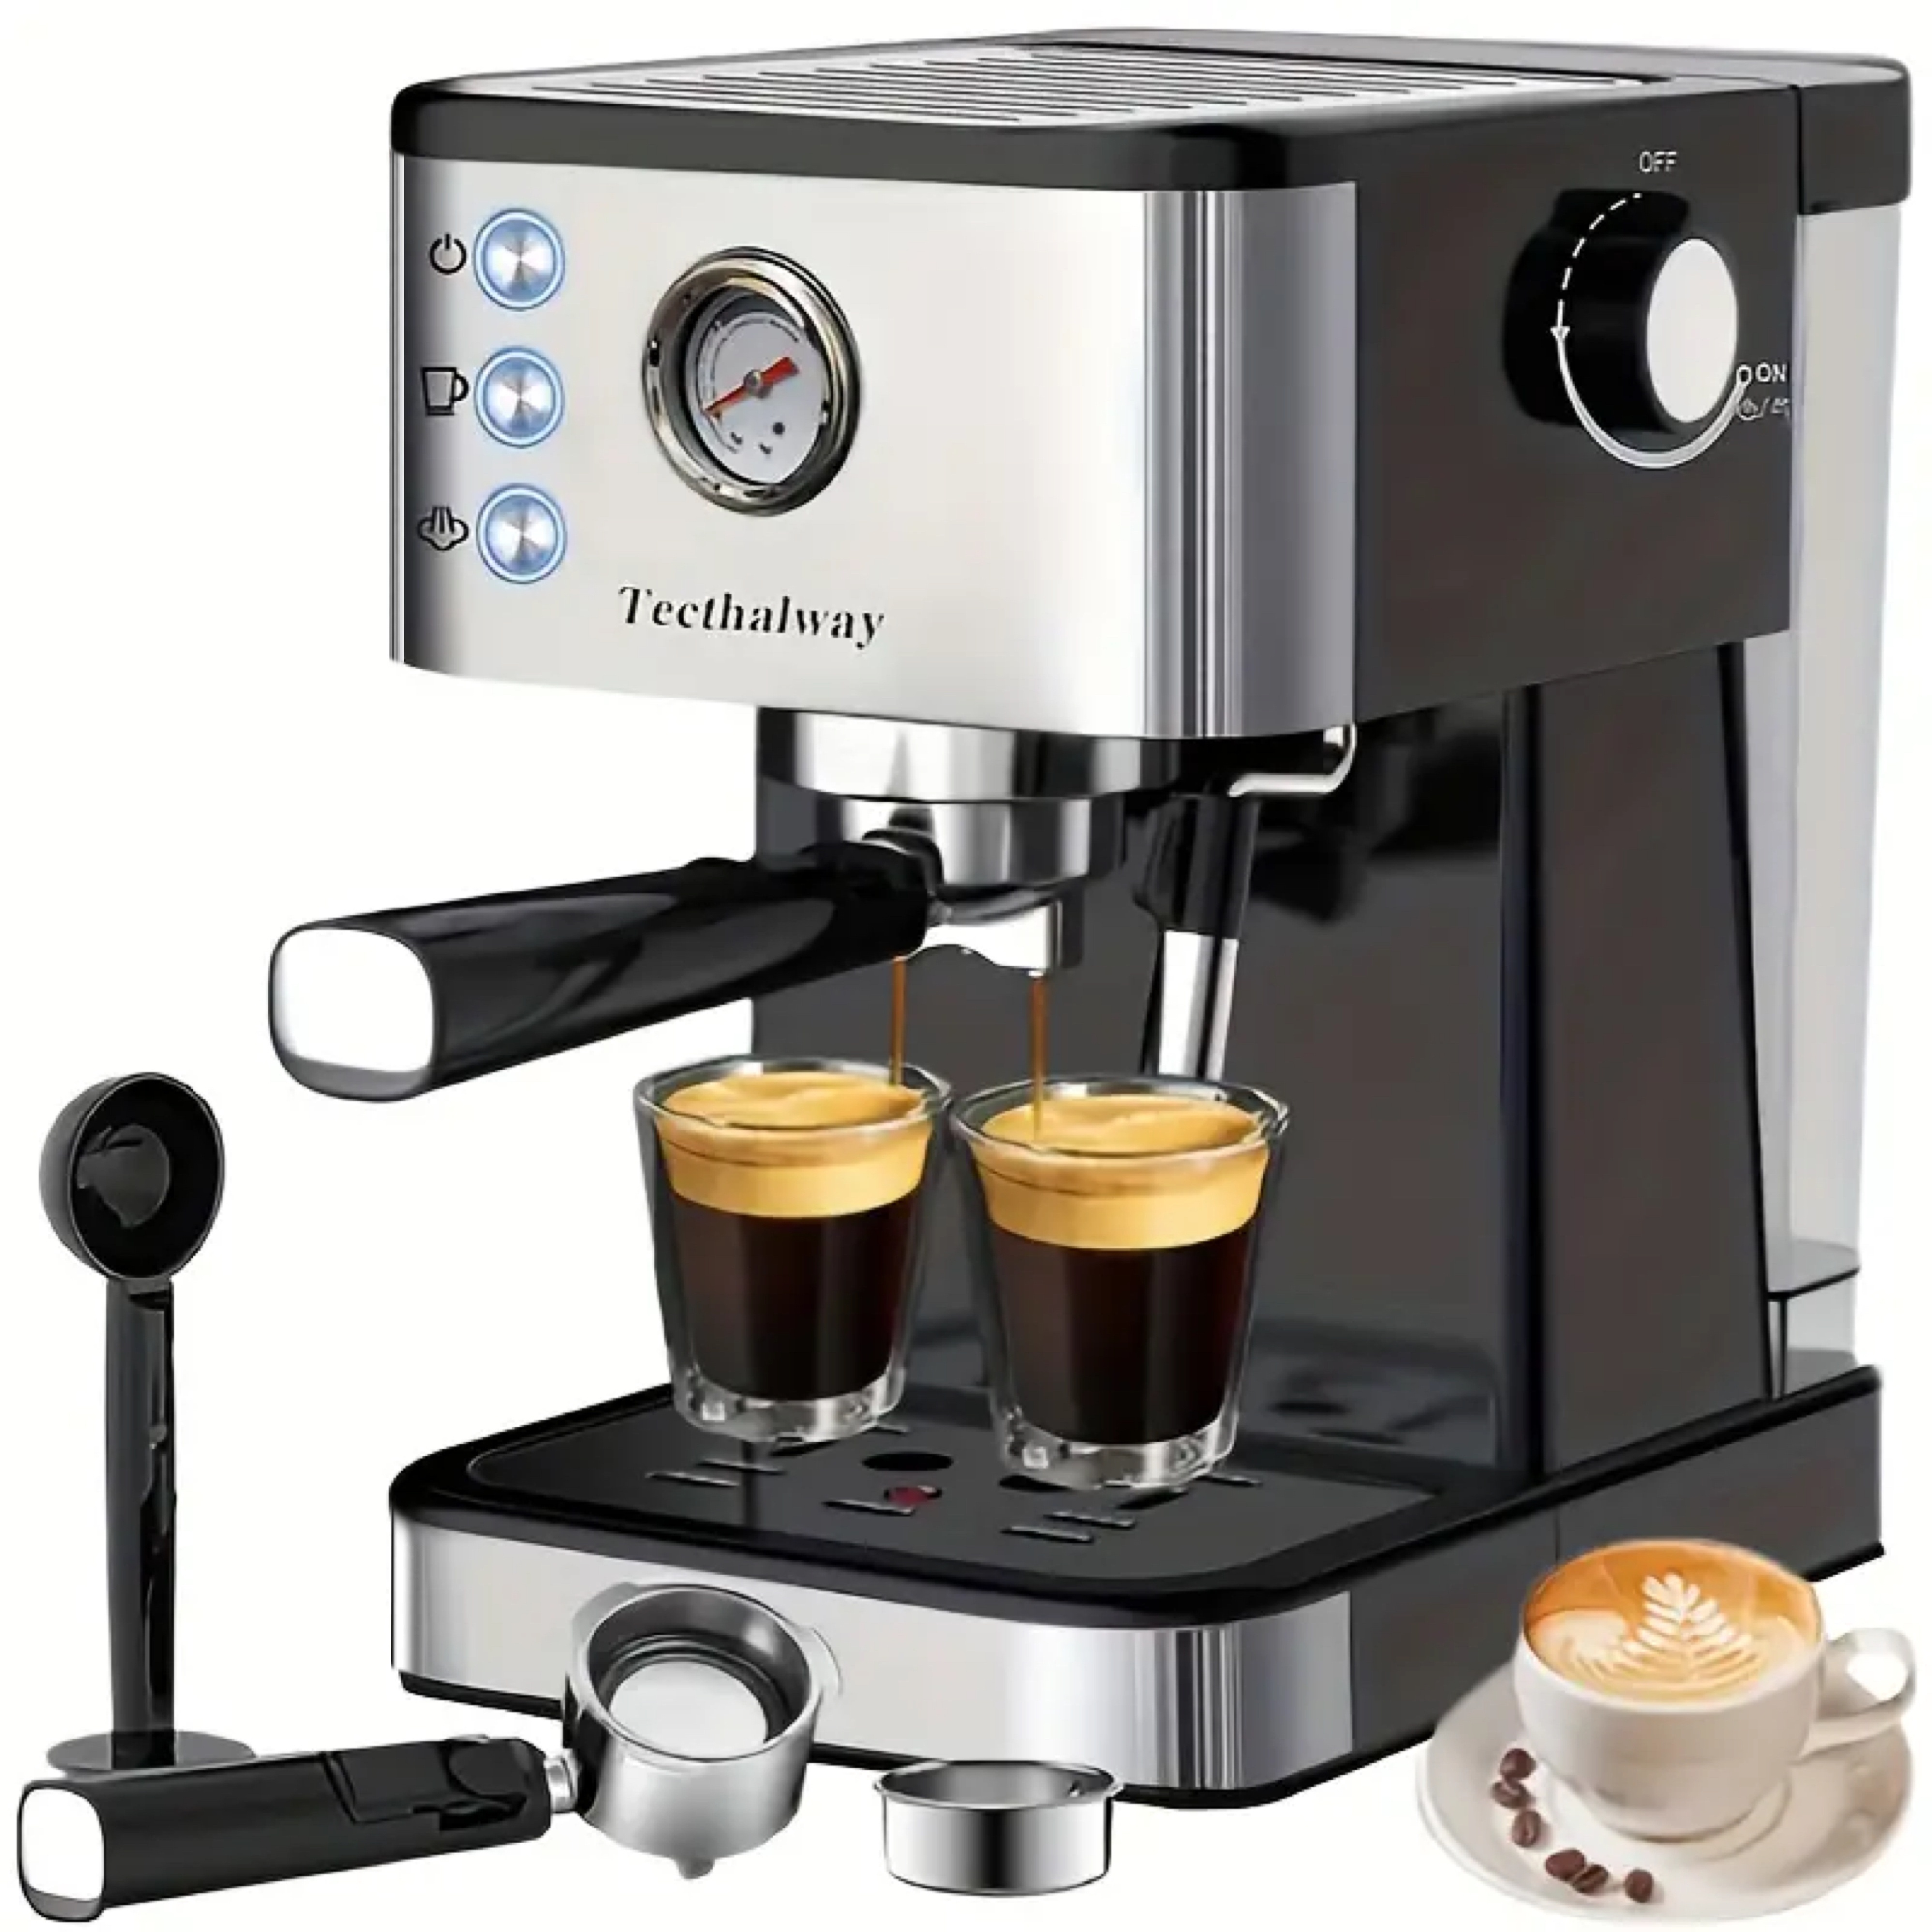 Bonsenkitchen Espresso Machine 15 Bar Expresso Coffee Maker with Milk  Frother Wand, Fast Heating Automatic Coffee Machines for Espresso,  Cappuccino Latte and Ma…